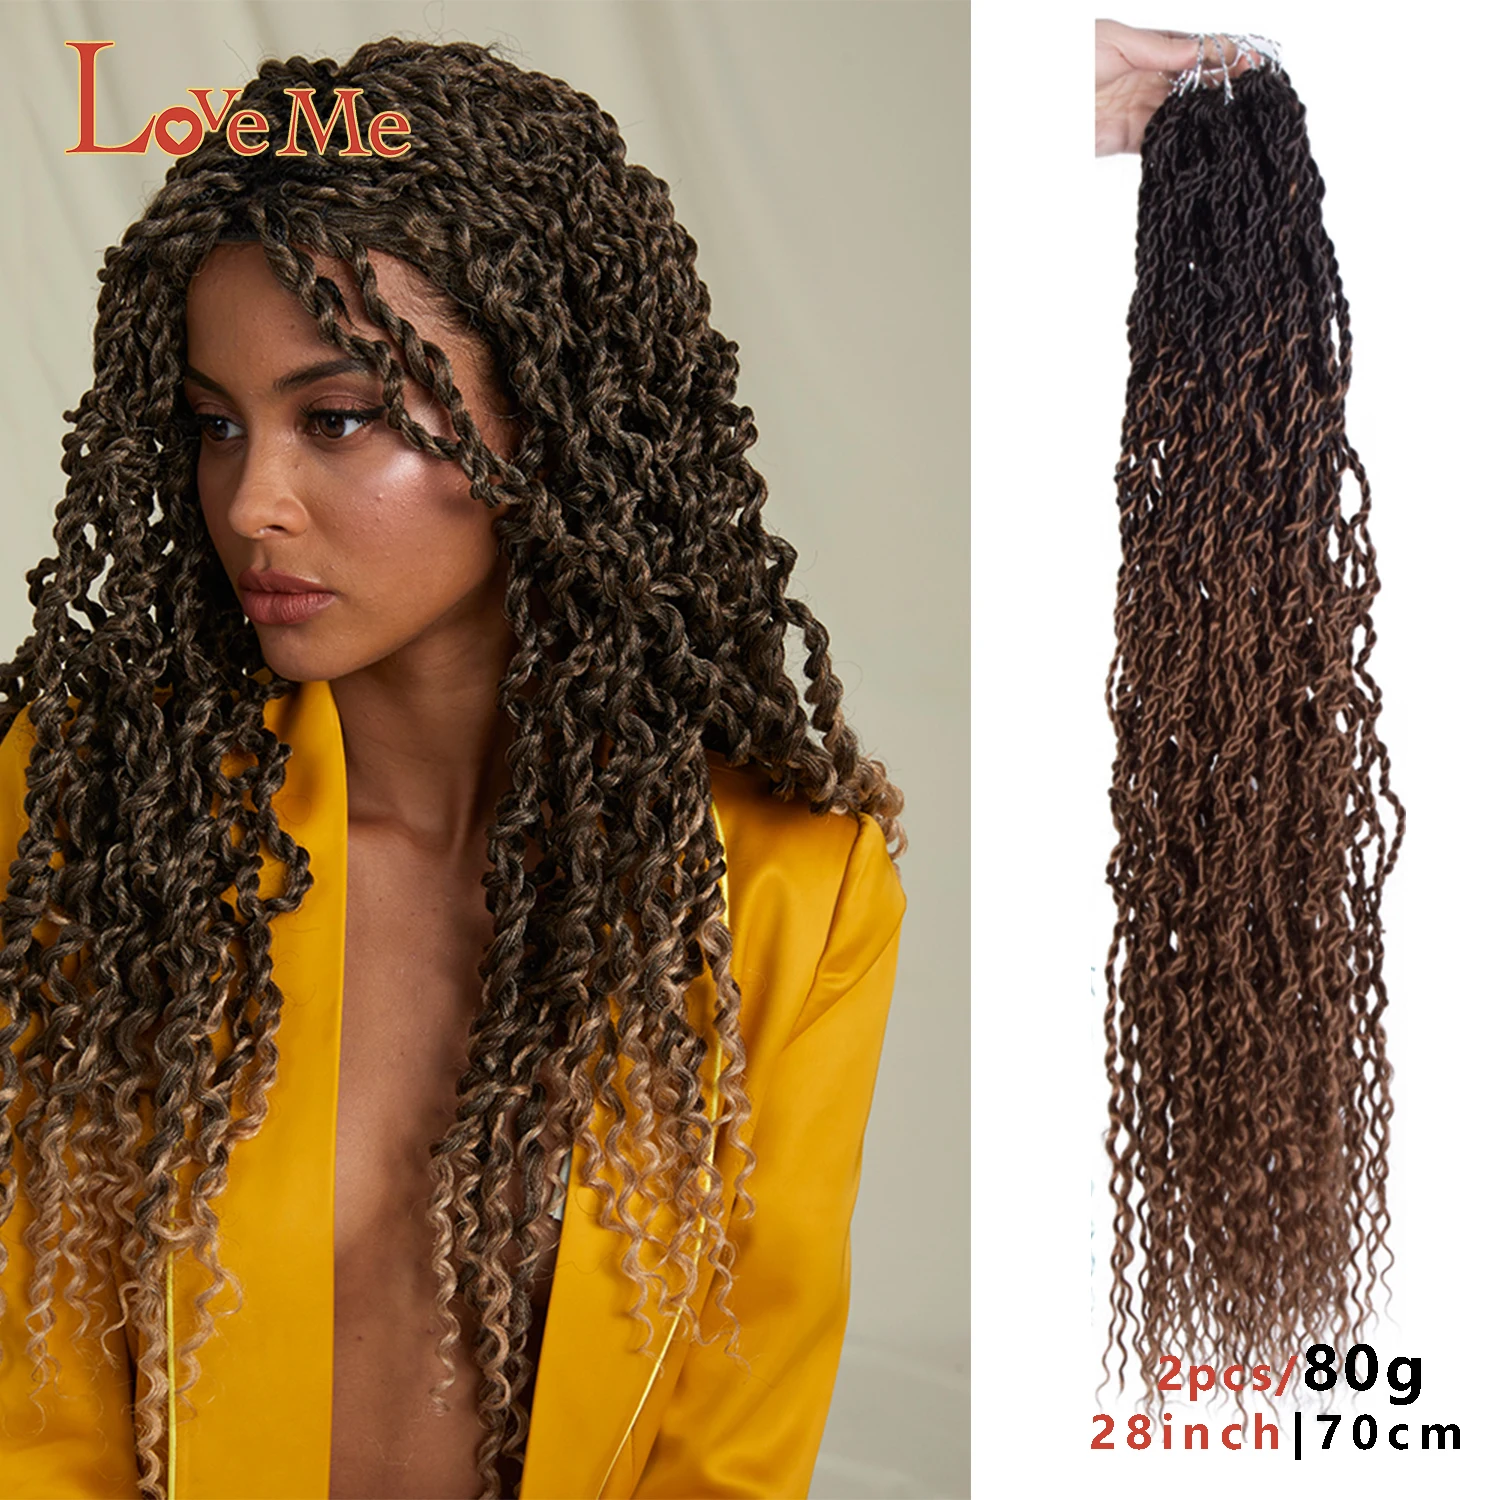 

Synthetic Braiding Extension Colored Braid Crotchet Braids Passion Twist River Hair Faux Locs With Curly Hair for Black Women LO